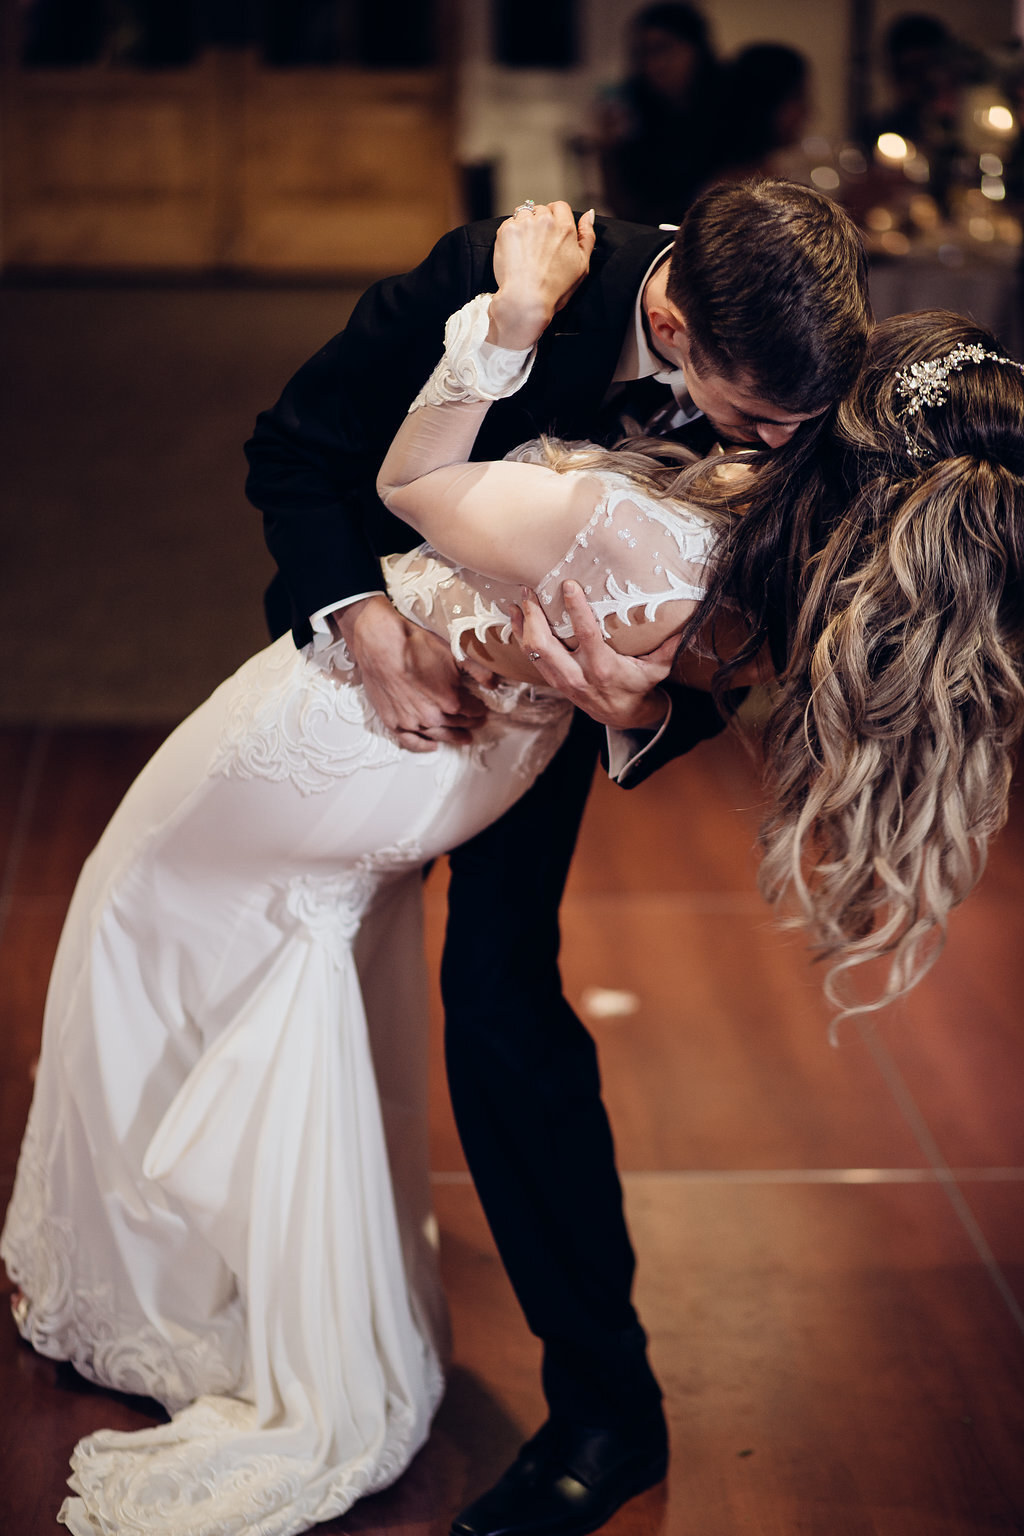 Wedding Photograph Of Bride And Groom Kissing While Dancing Los Angeles